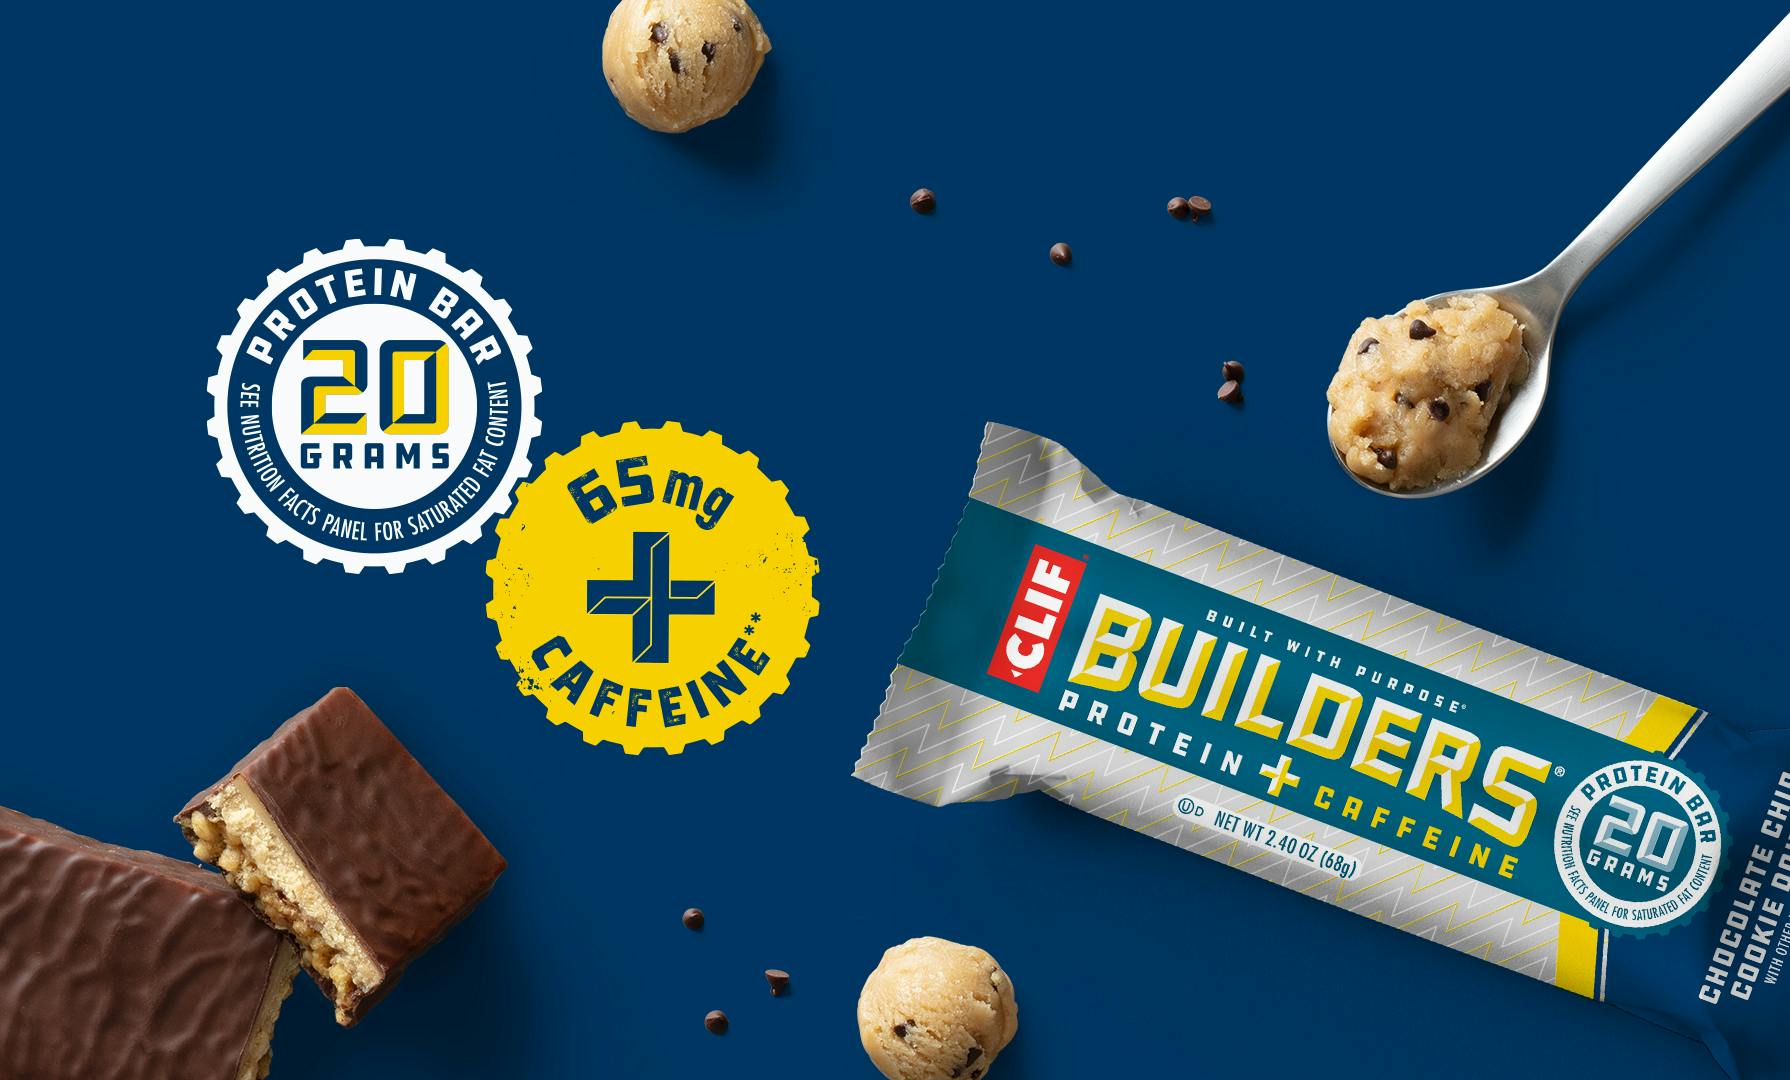 Builders Cookie Dough with Caffeine